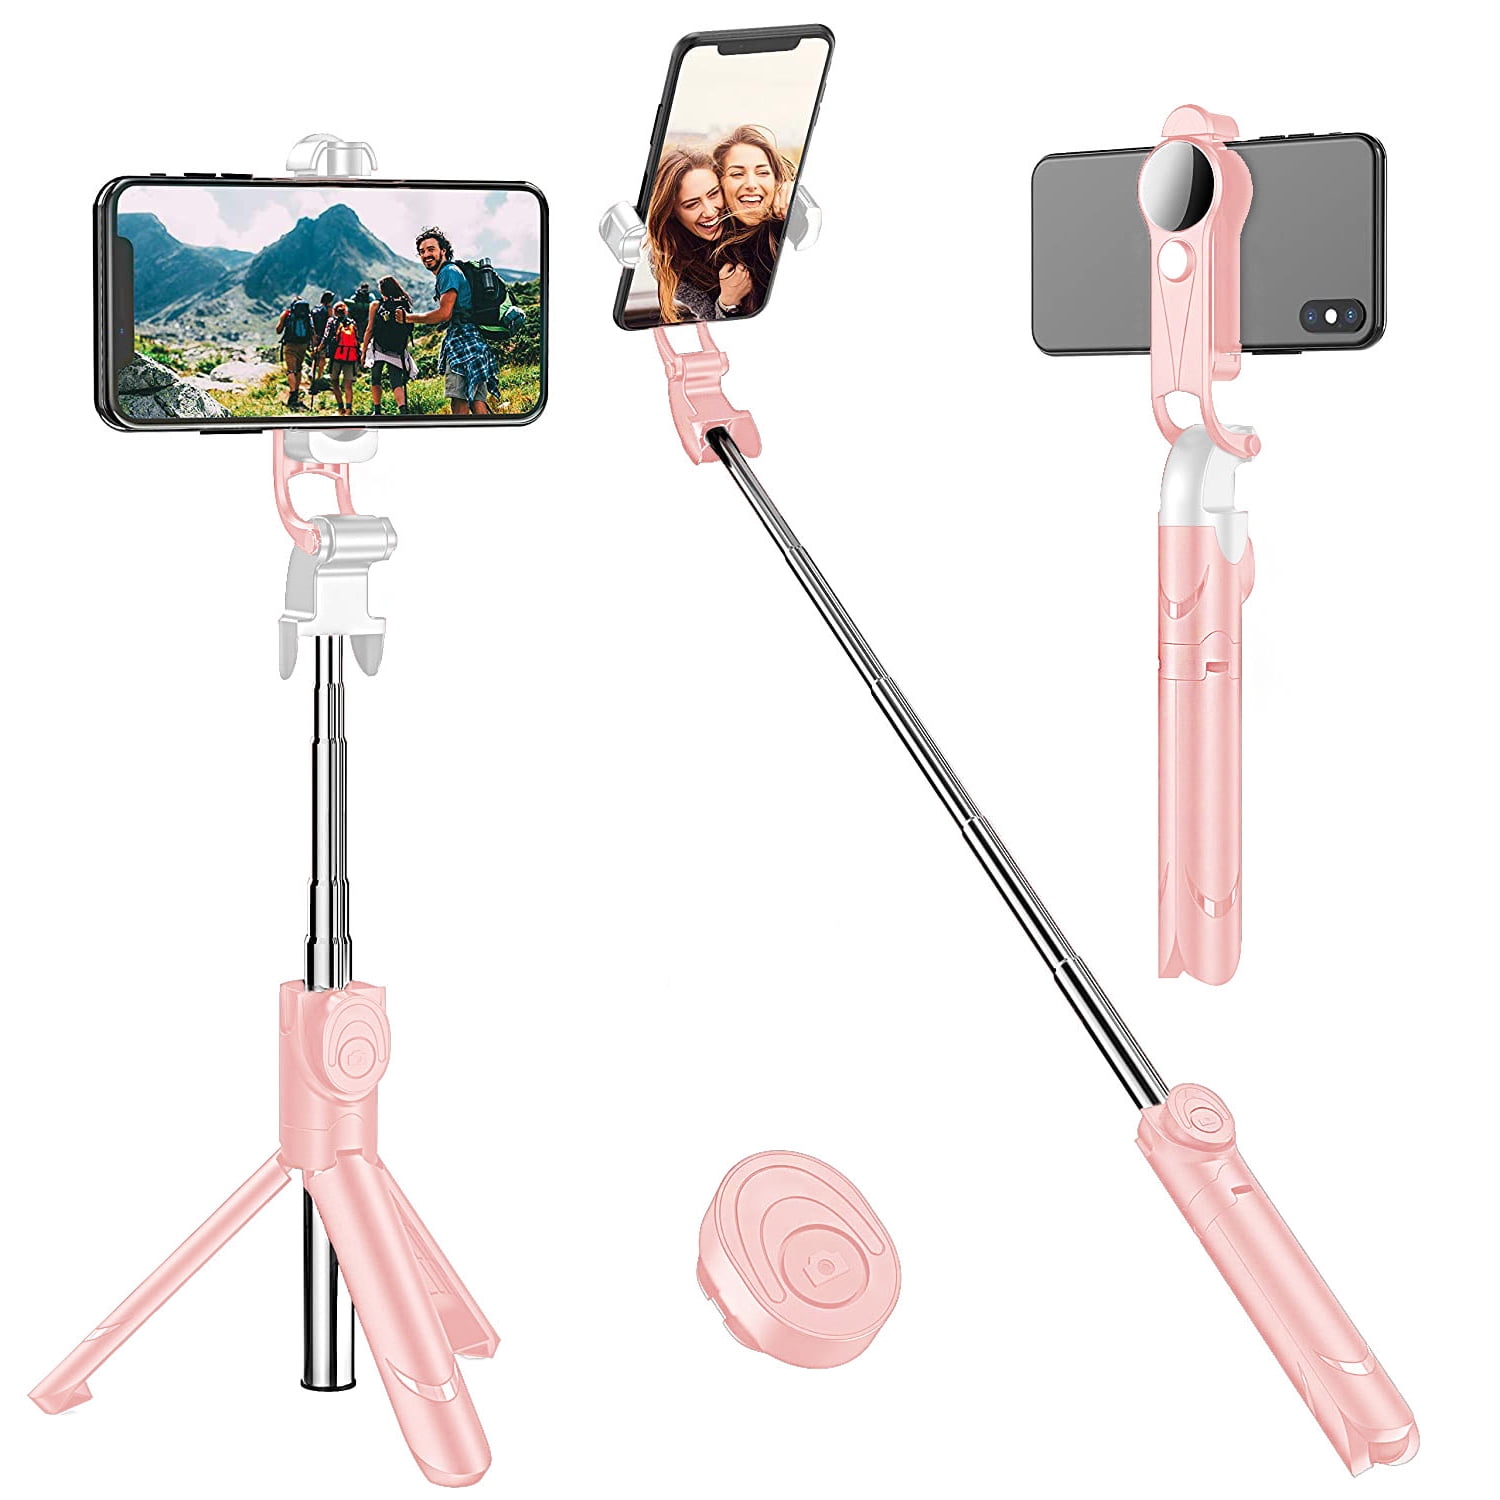 Bluetooth Selfie Stick, Extendable and Tripod Selfie Stick with Wireless Remote for iPhone XR/XS/X/8/Plus/7/Plus/SE/6S/6/Plus, Galaxy S9/S8/S7/S6, Android, More - Walmart.com